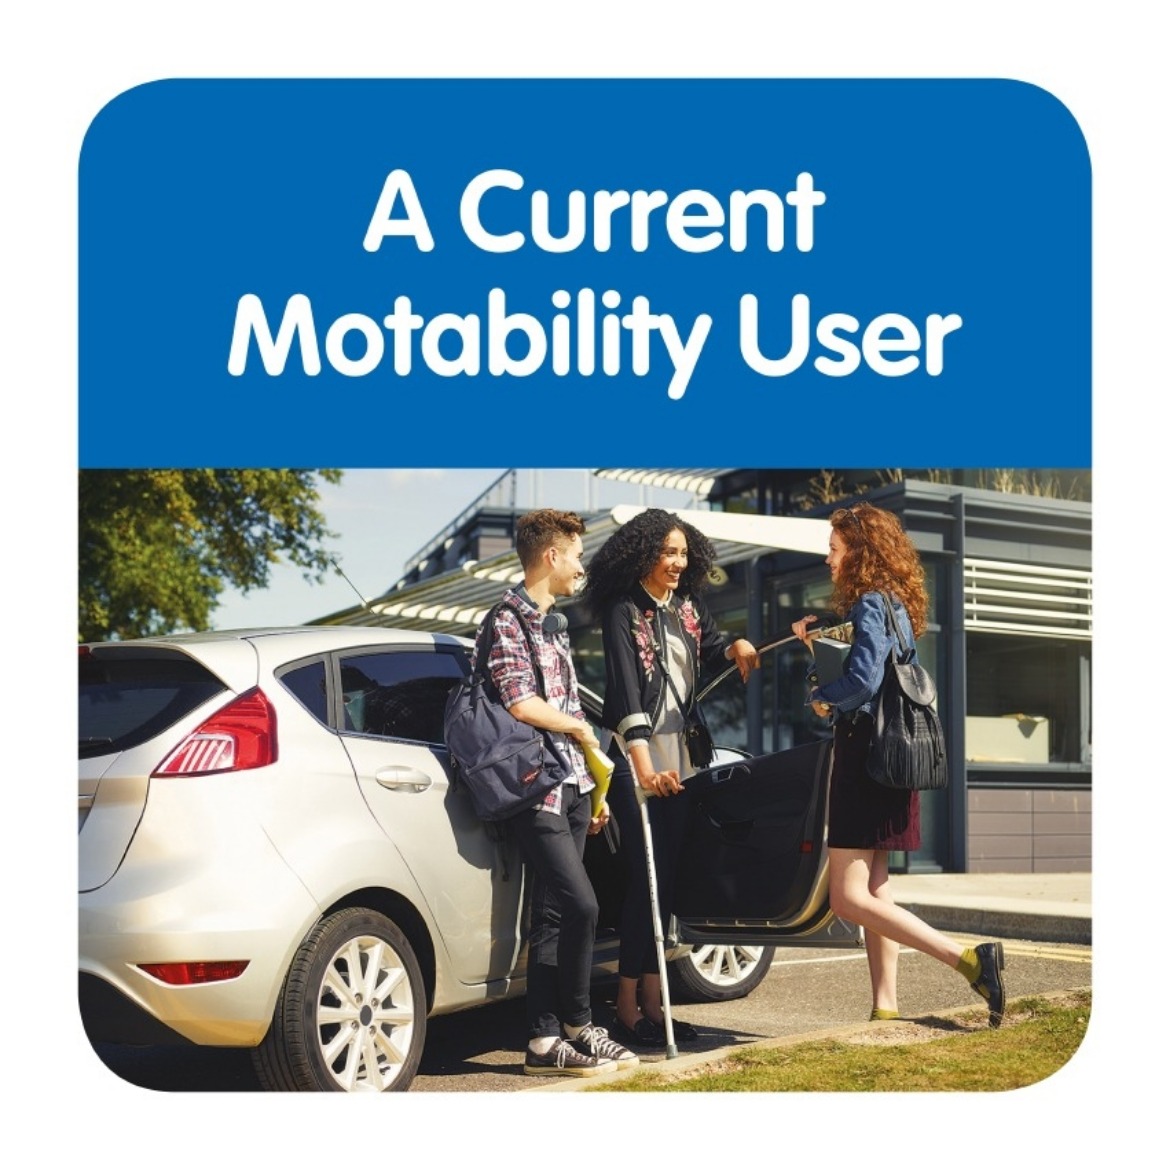 Existing Motability Users